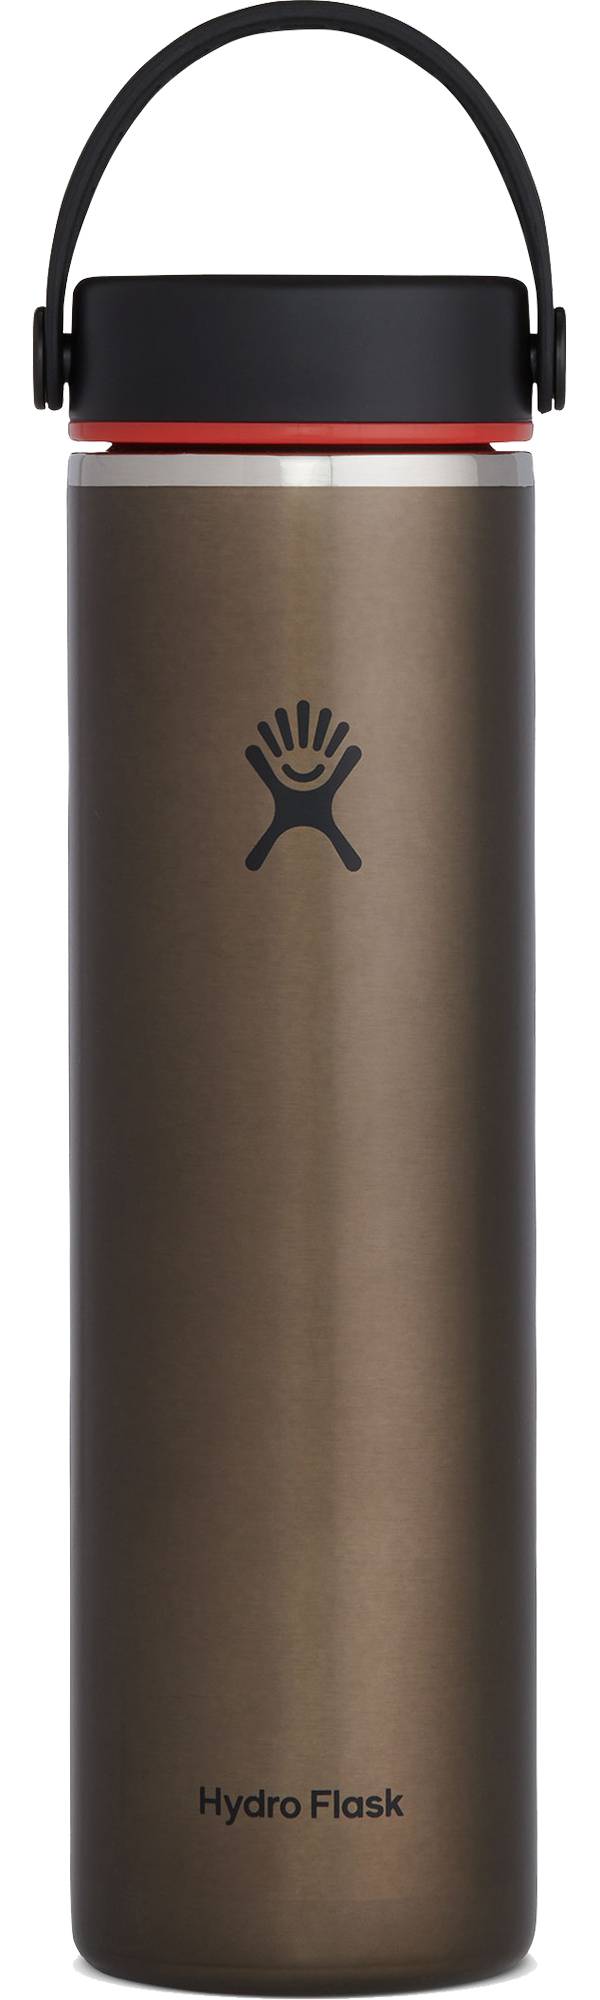 Hydro Flask 24 oz. Lightweight Wide Mouth Trail Series Bottle product image